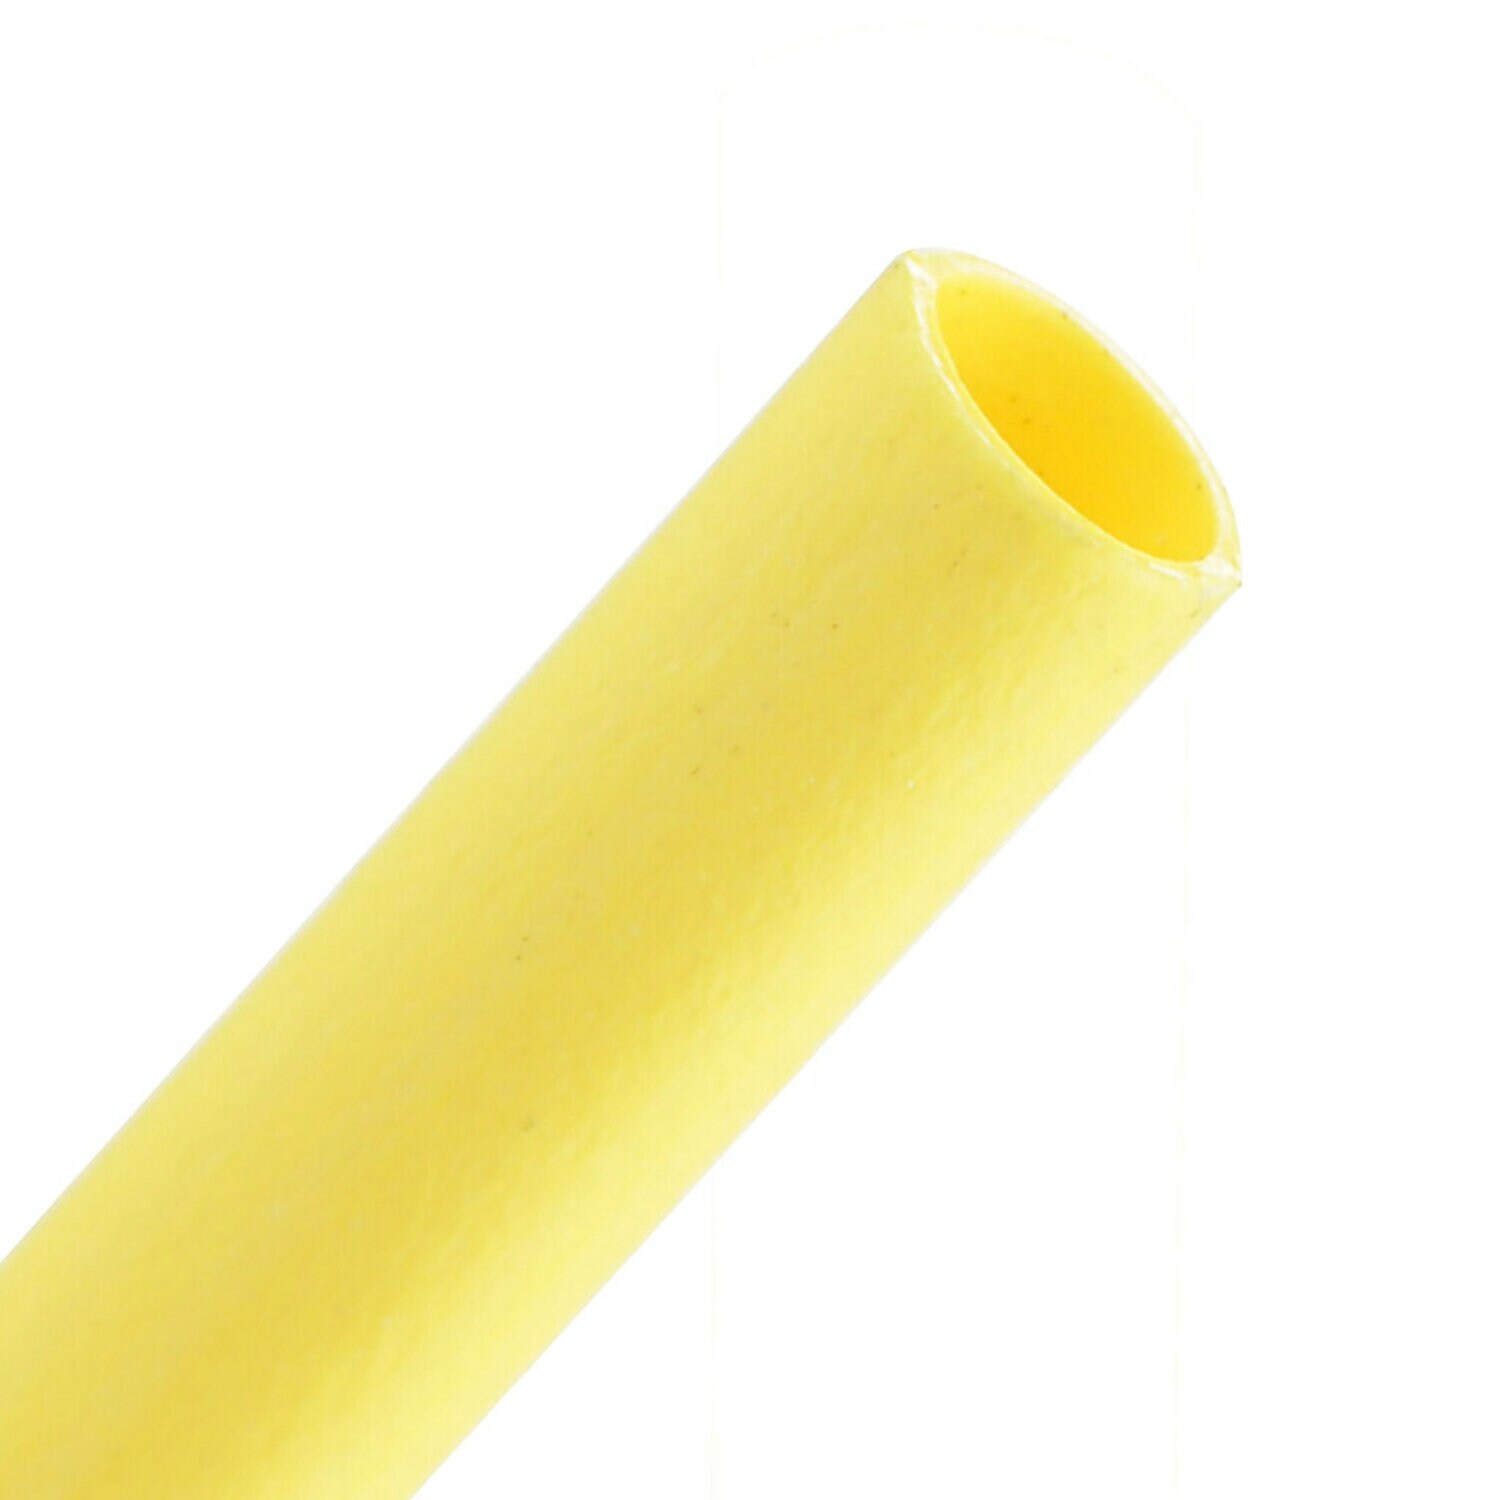 7010321002 - 3M Heat Shrink Thin-Wall Tubing FP-301-3/32-48"-Yellow-250 Pcs, 48 in
Length sticks, 250 pieces/case